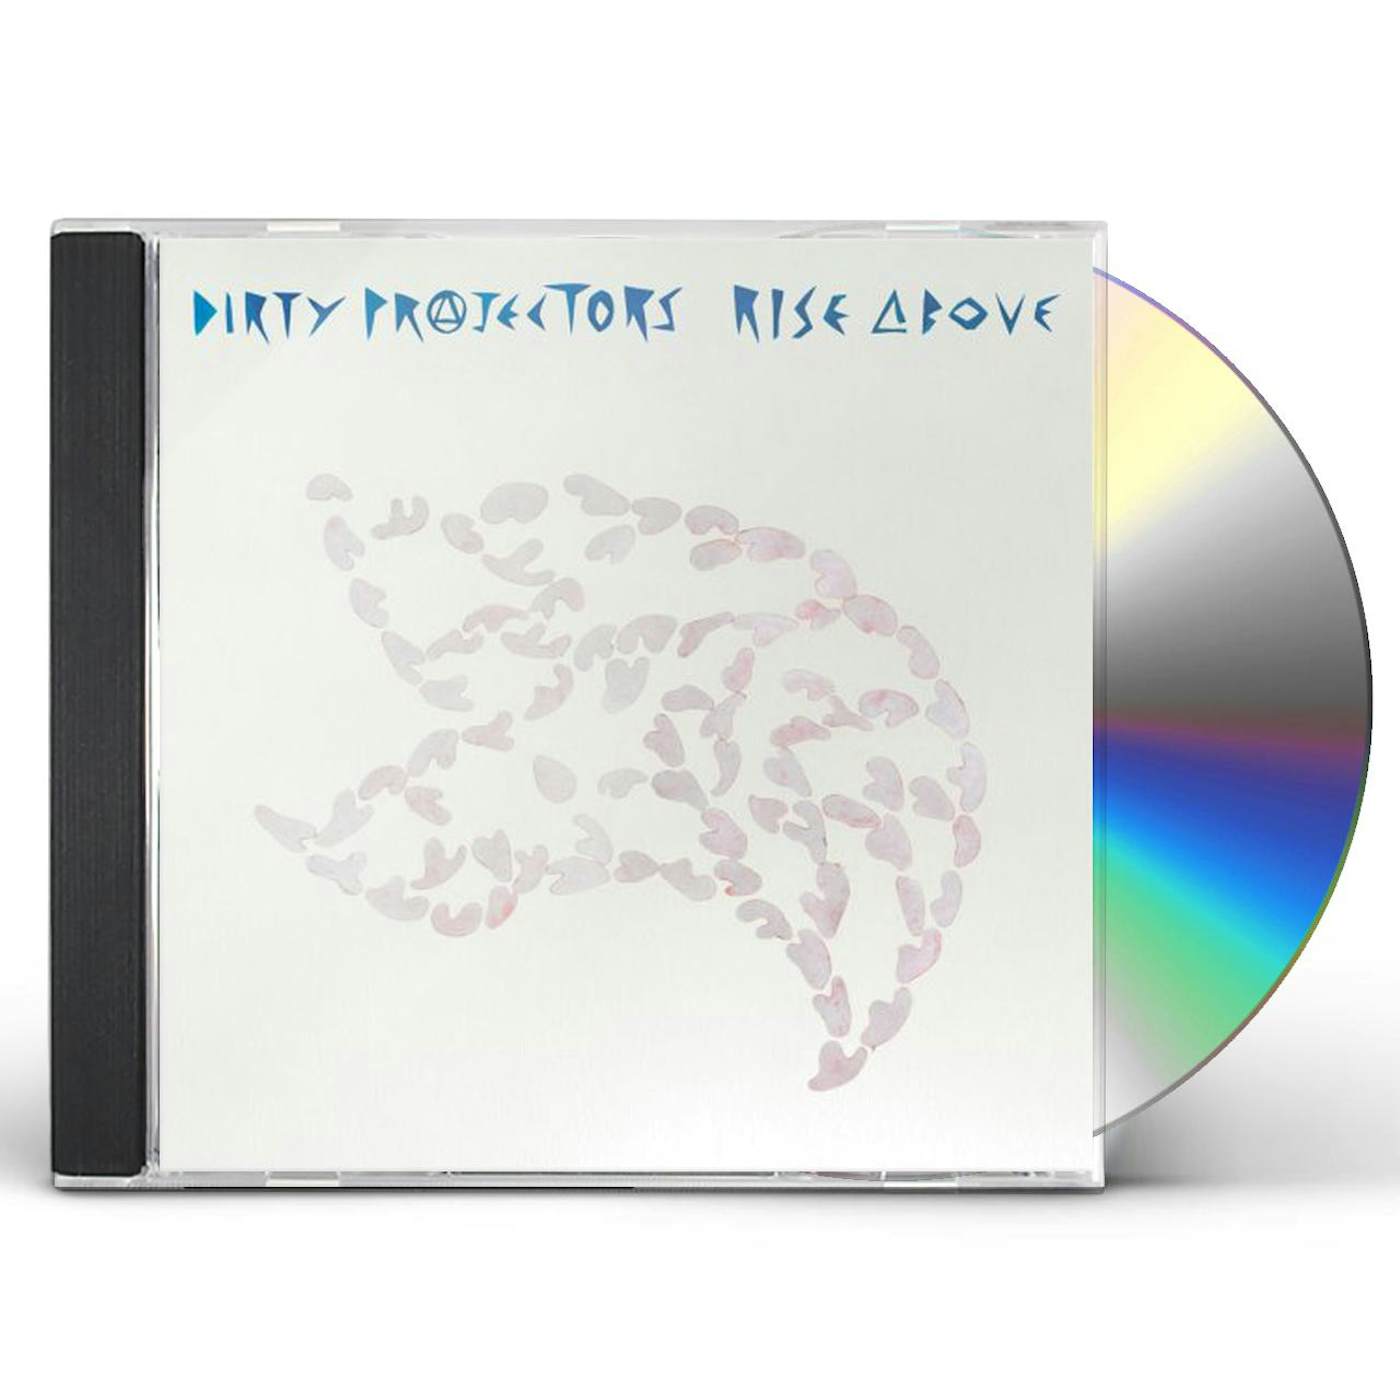 Dirty Projectors RISE ABOVE CD